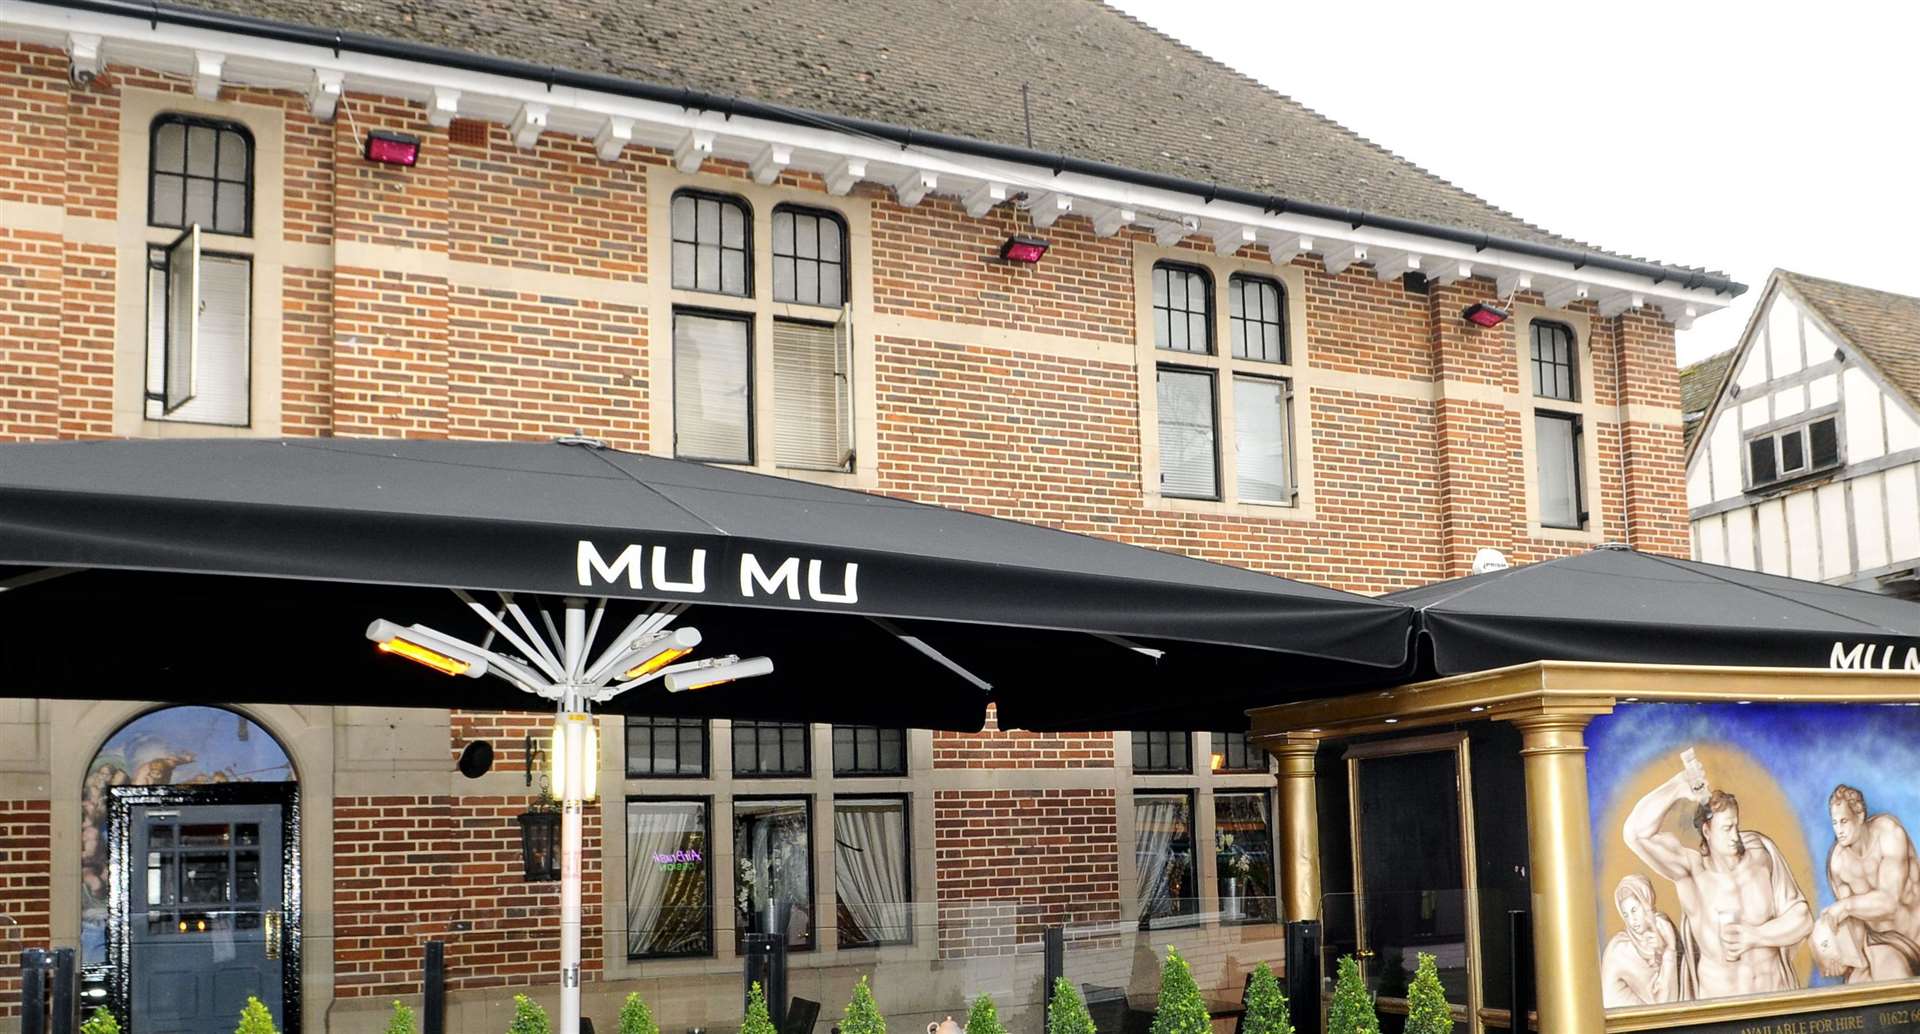 Mu Mu is based at 108-110 Week Street. This is how it looked in 2010 Picture by: Simon Hildrew